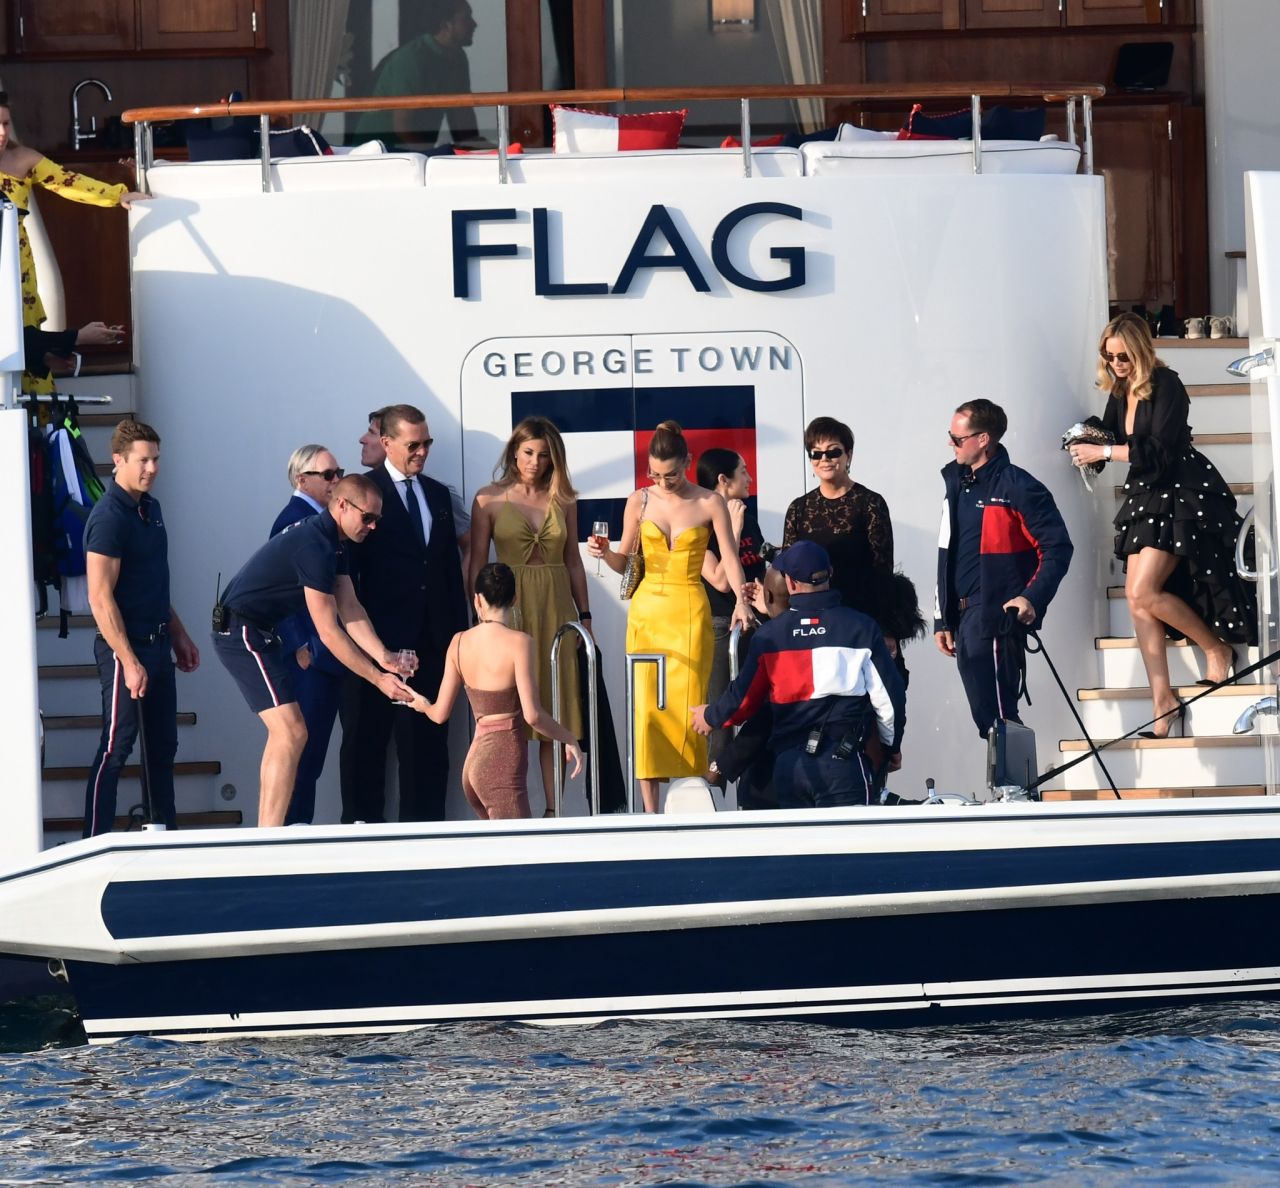 bella-hadid-and-kendall-jenner-tommy-hilfigers-yacht-in-monaco-05-25-2019-21.jpg